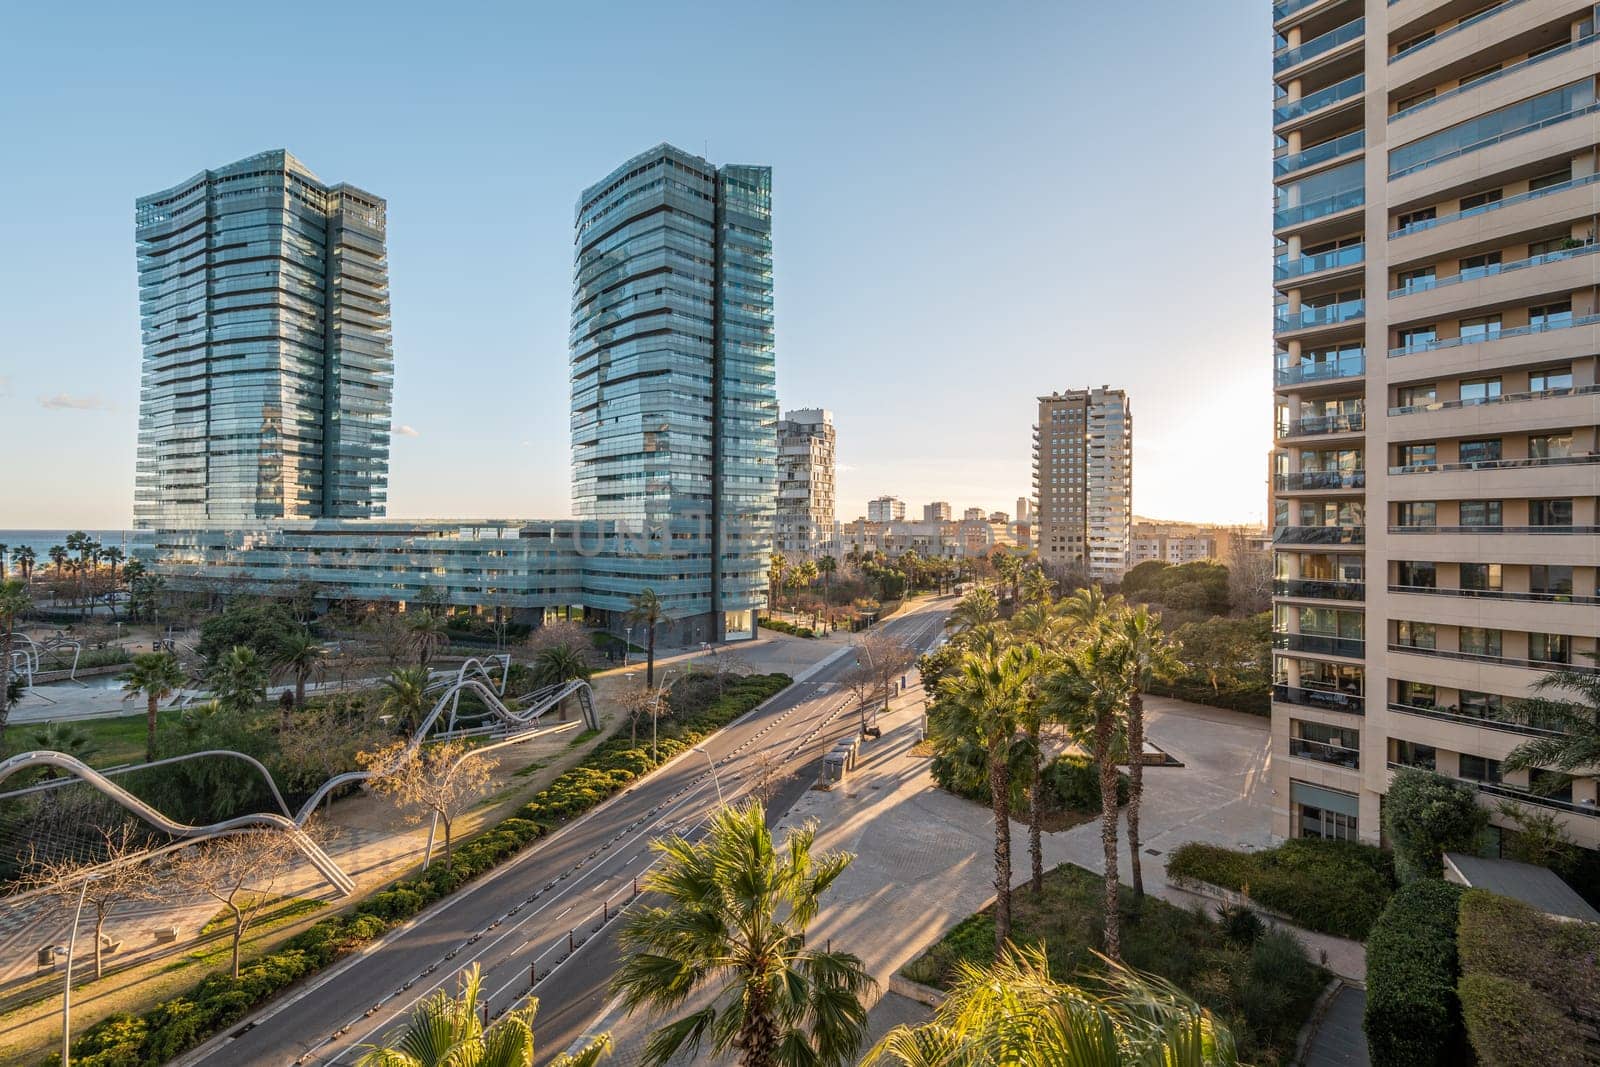 Diagonal Mar area in Barcelona with skyscrapers and road junctions by apavlin